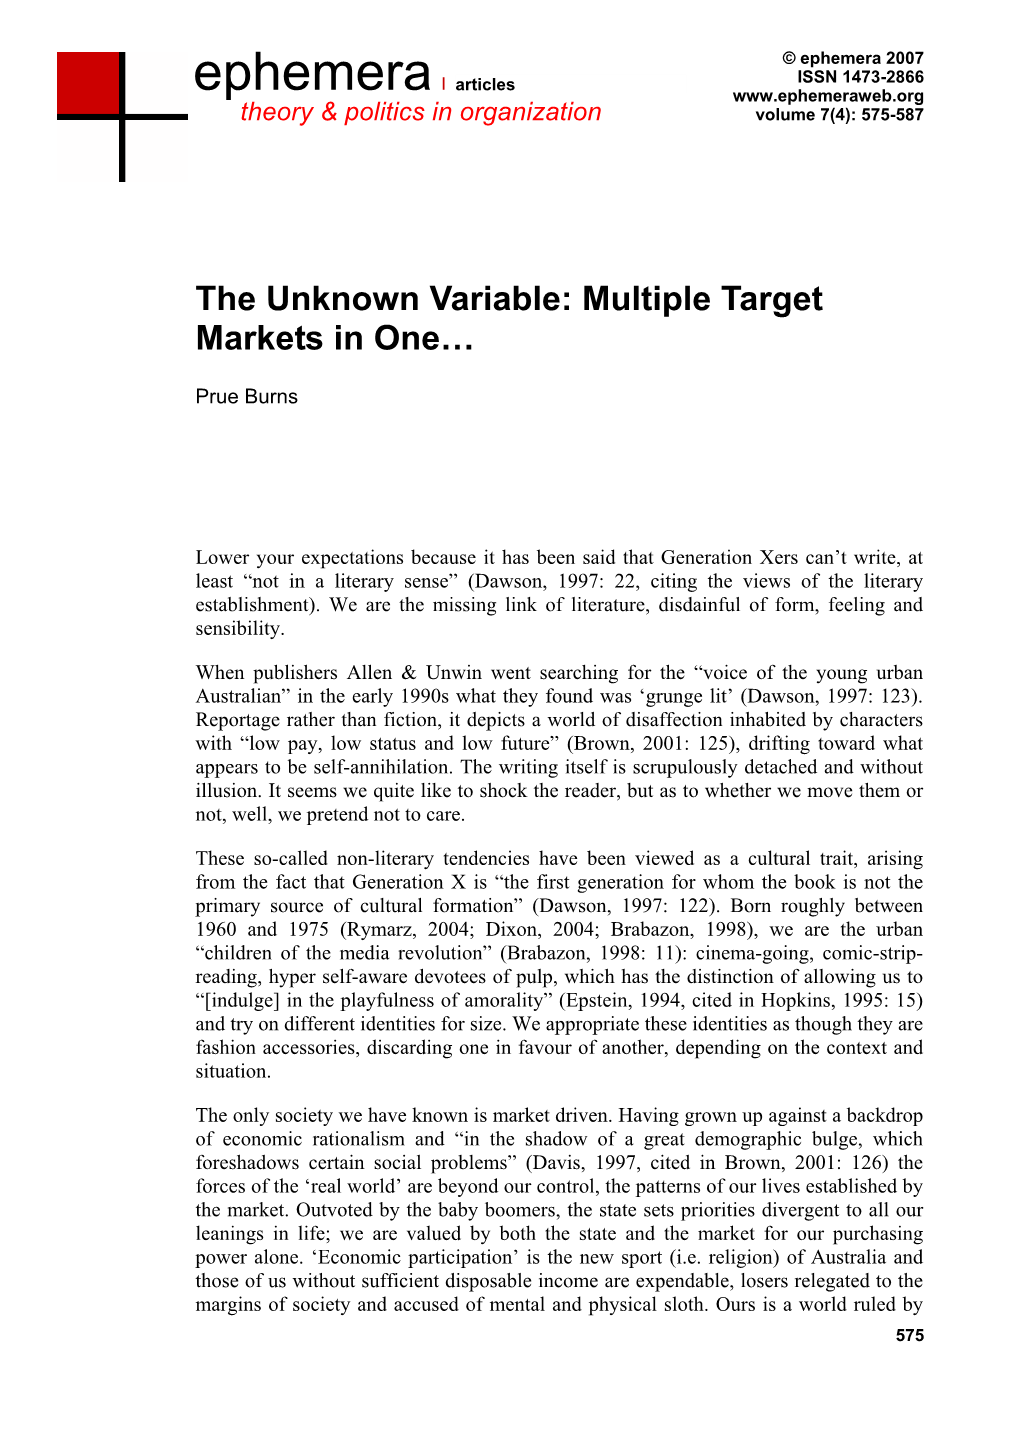 The Unknown Variable: Multiple Target Markets in One…